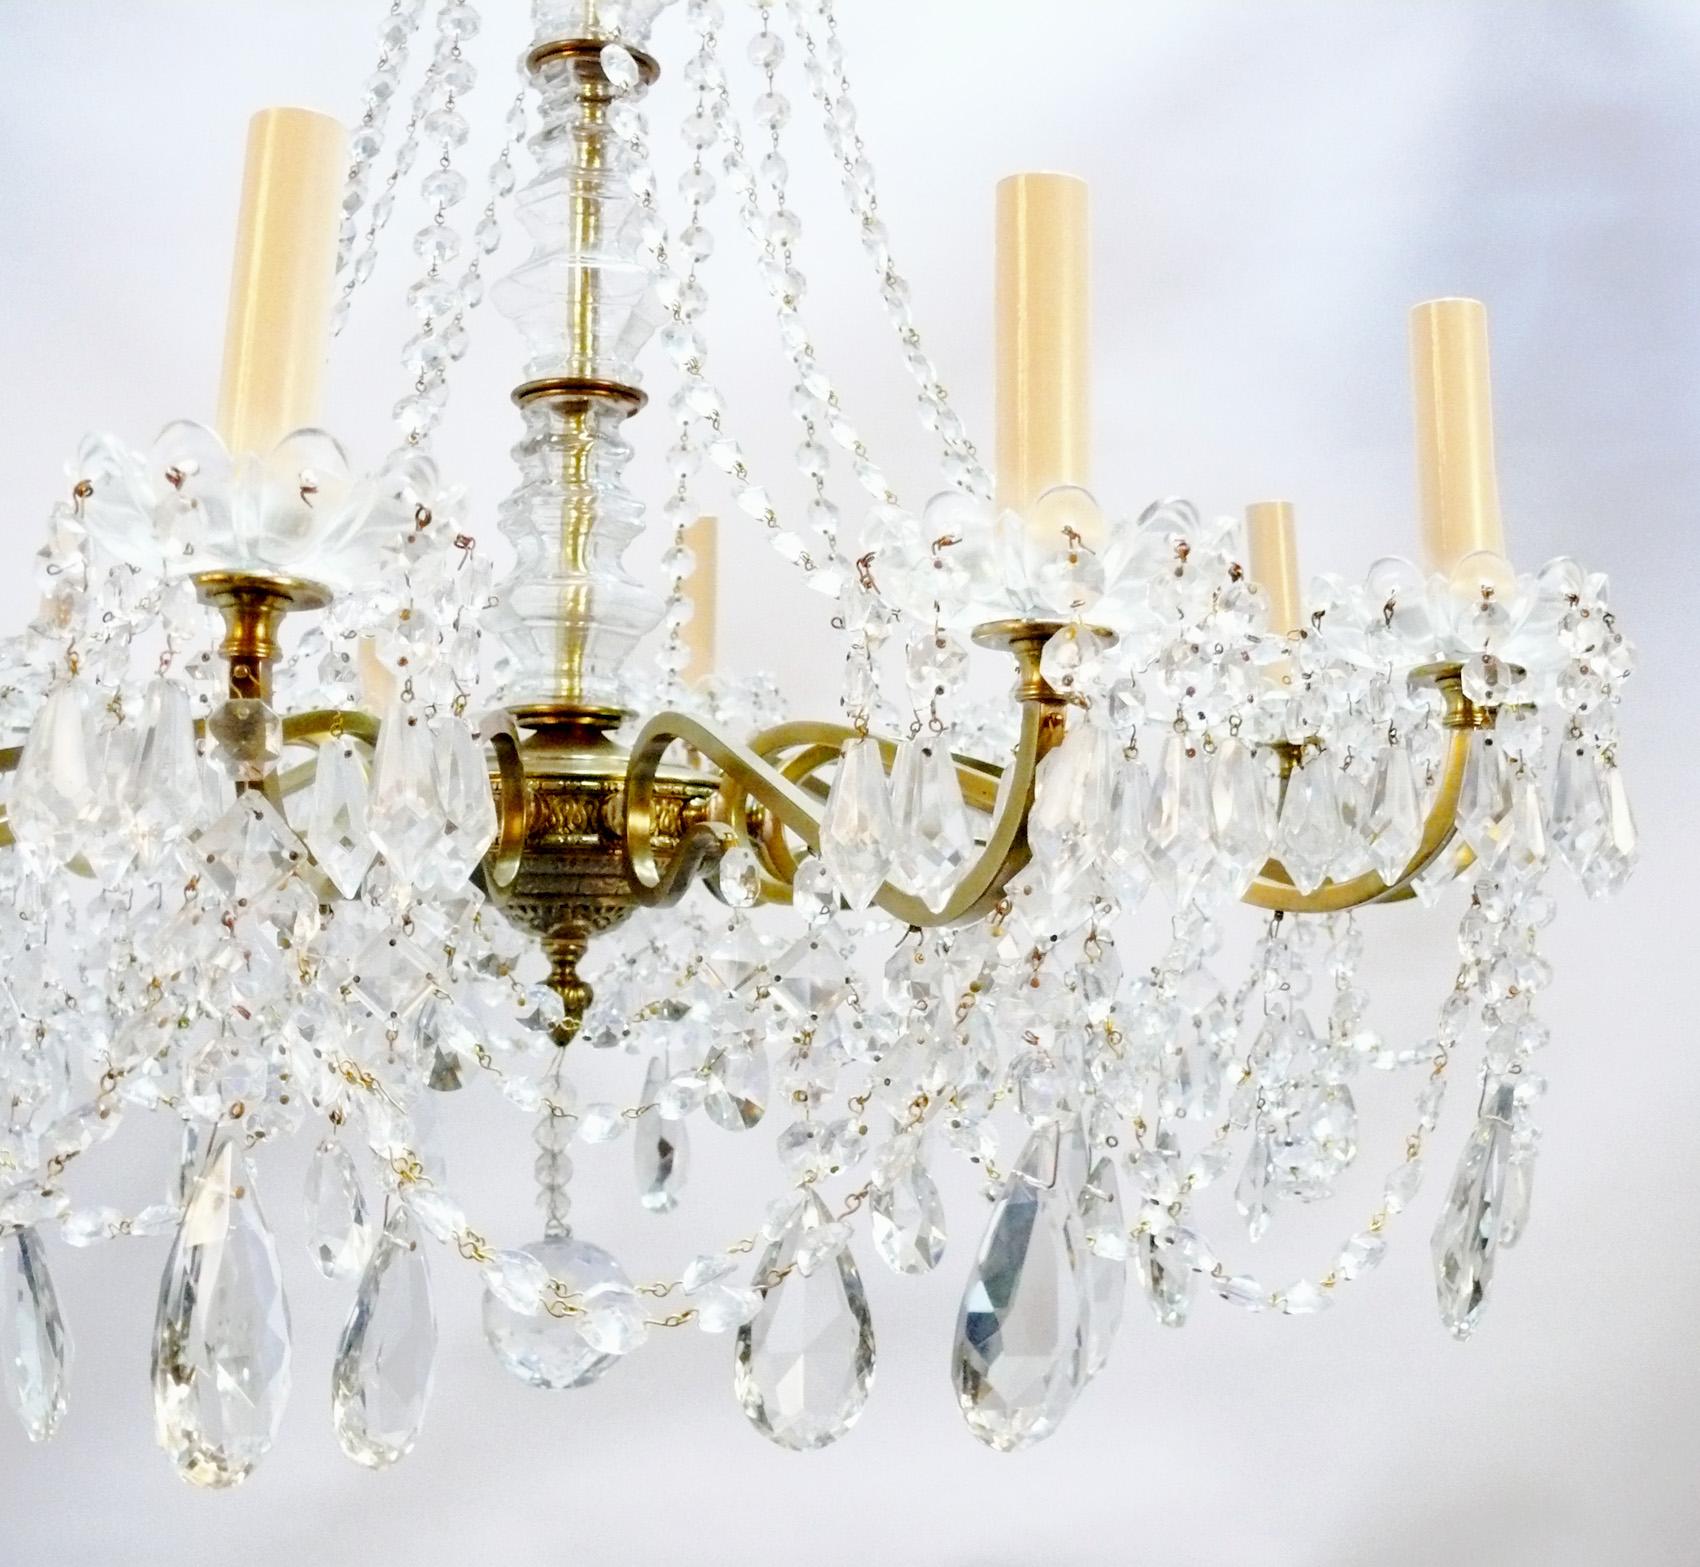 Glamorous French crystal chandlier with brass armature, France, circa 1950s. Looks incredible when lit! It has been rewired and is ready to mount.